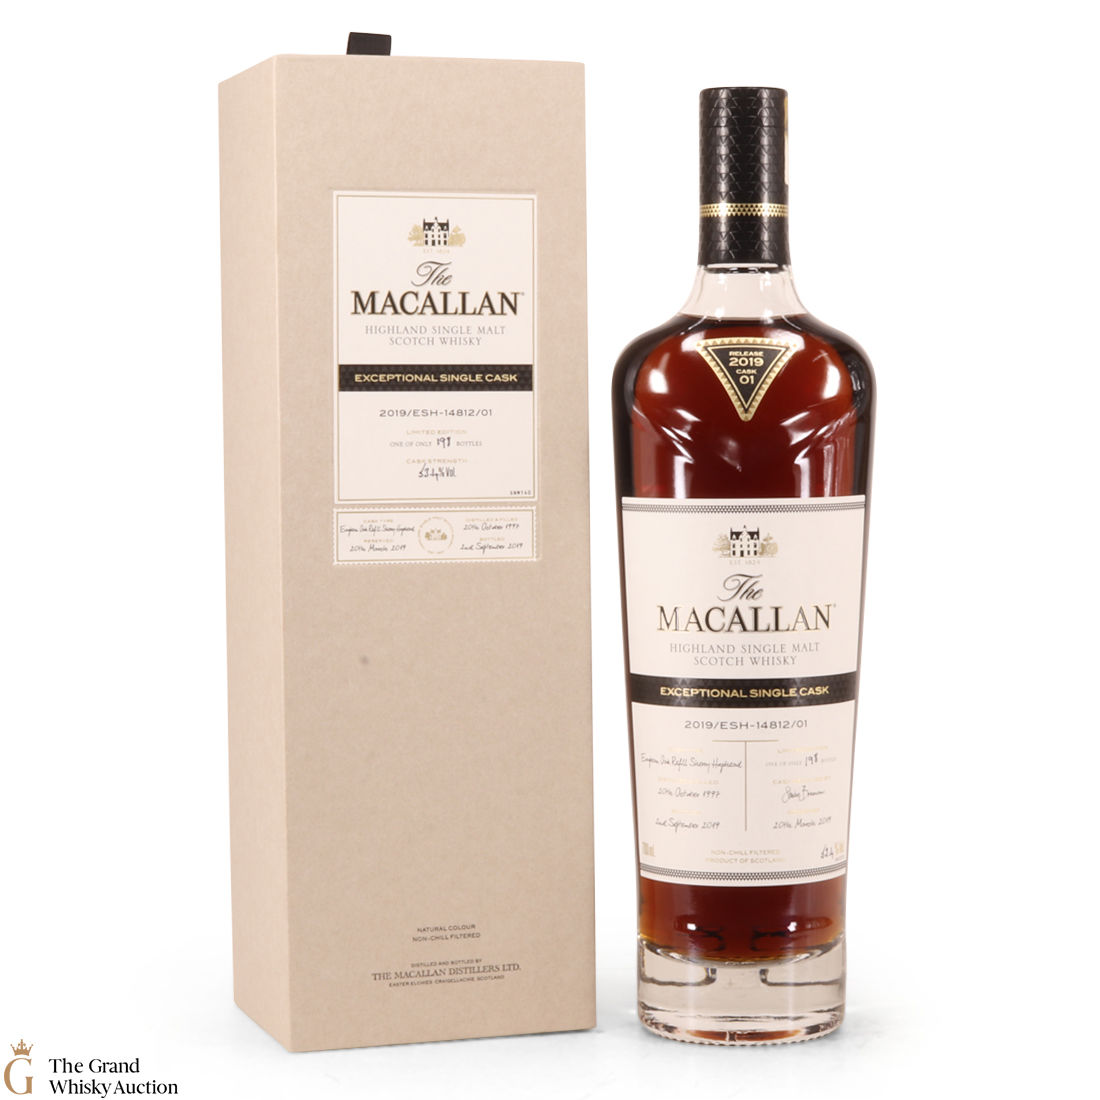 Macallan Exceptional Single Cask 2019 Esh 14812 01 Auction The Grand Whisky Auction